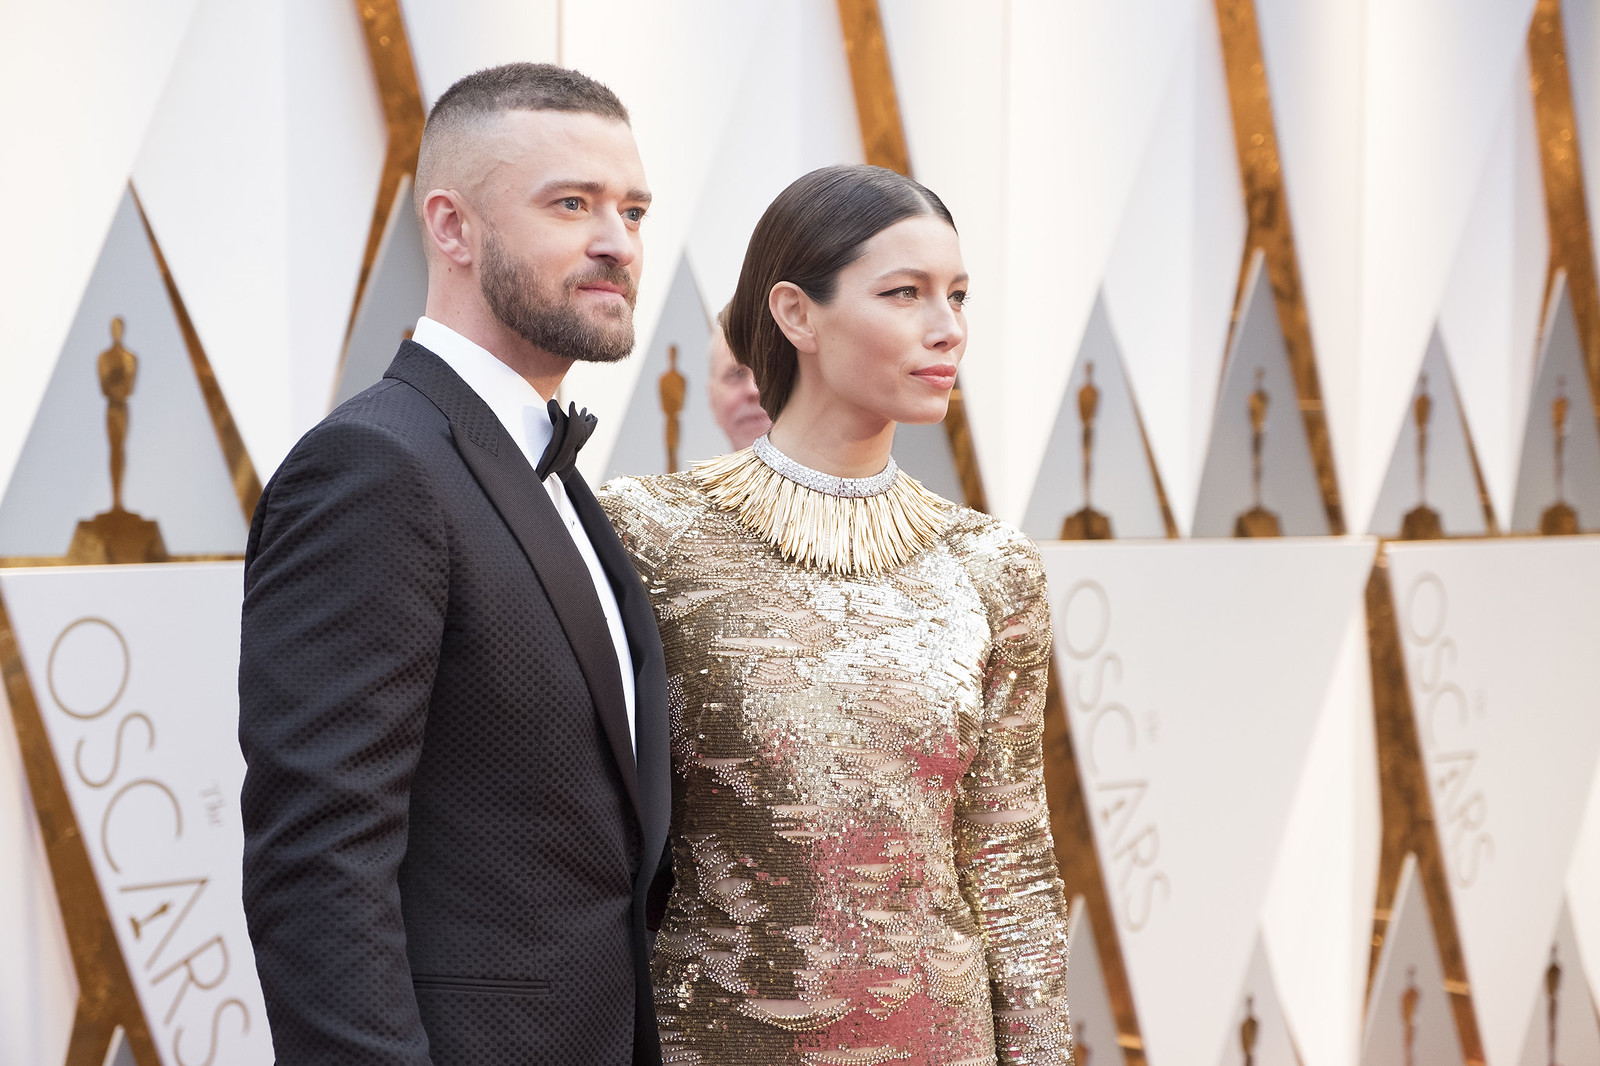 Jessica Biel says Justin Timberlake’s ‘Candy’ cameo was ‘an accident’